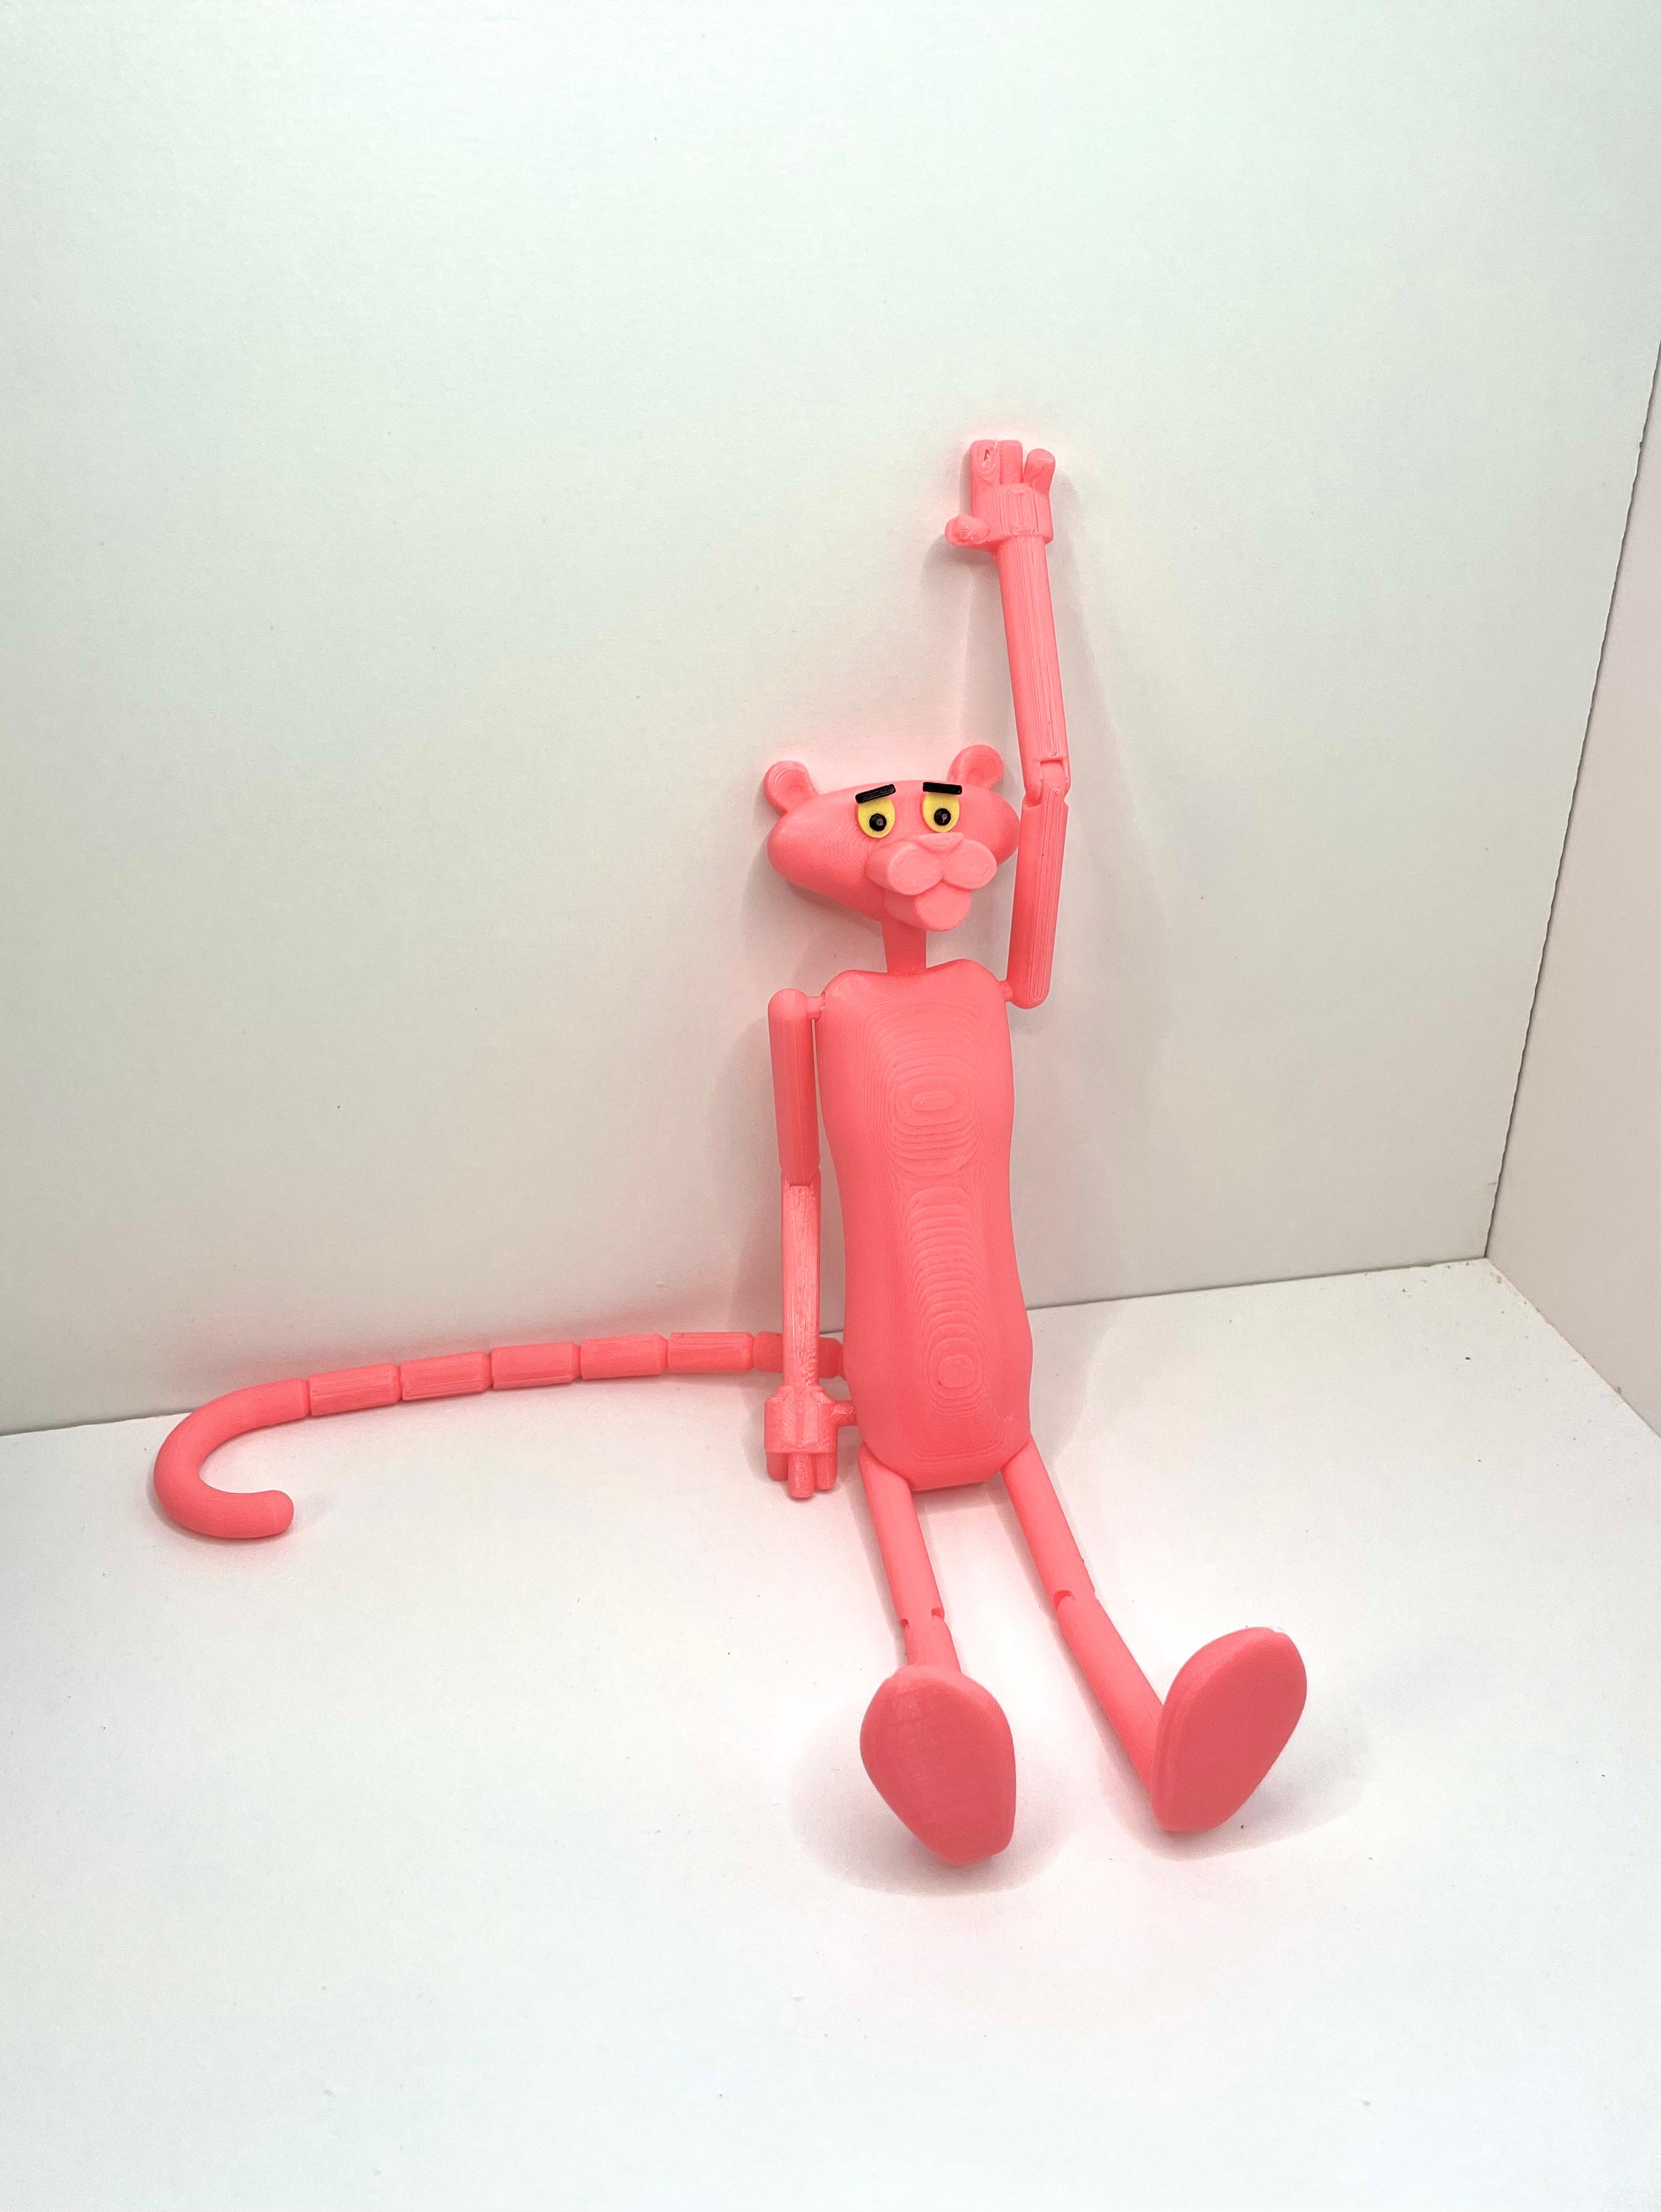 Retromaker's Pink Panther in Matterhackers Pink PLA